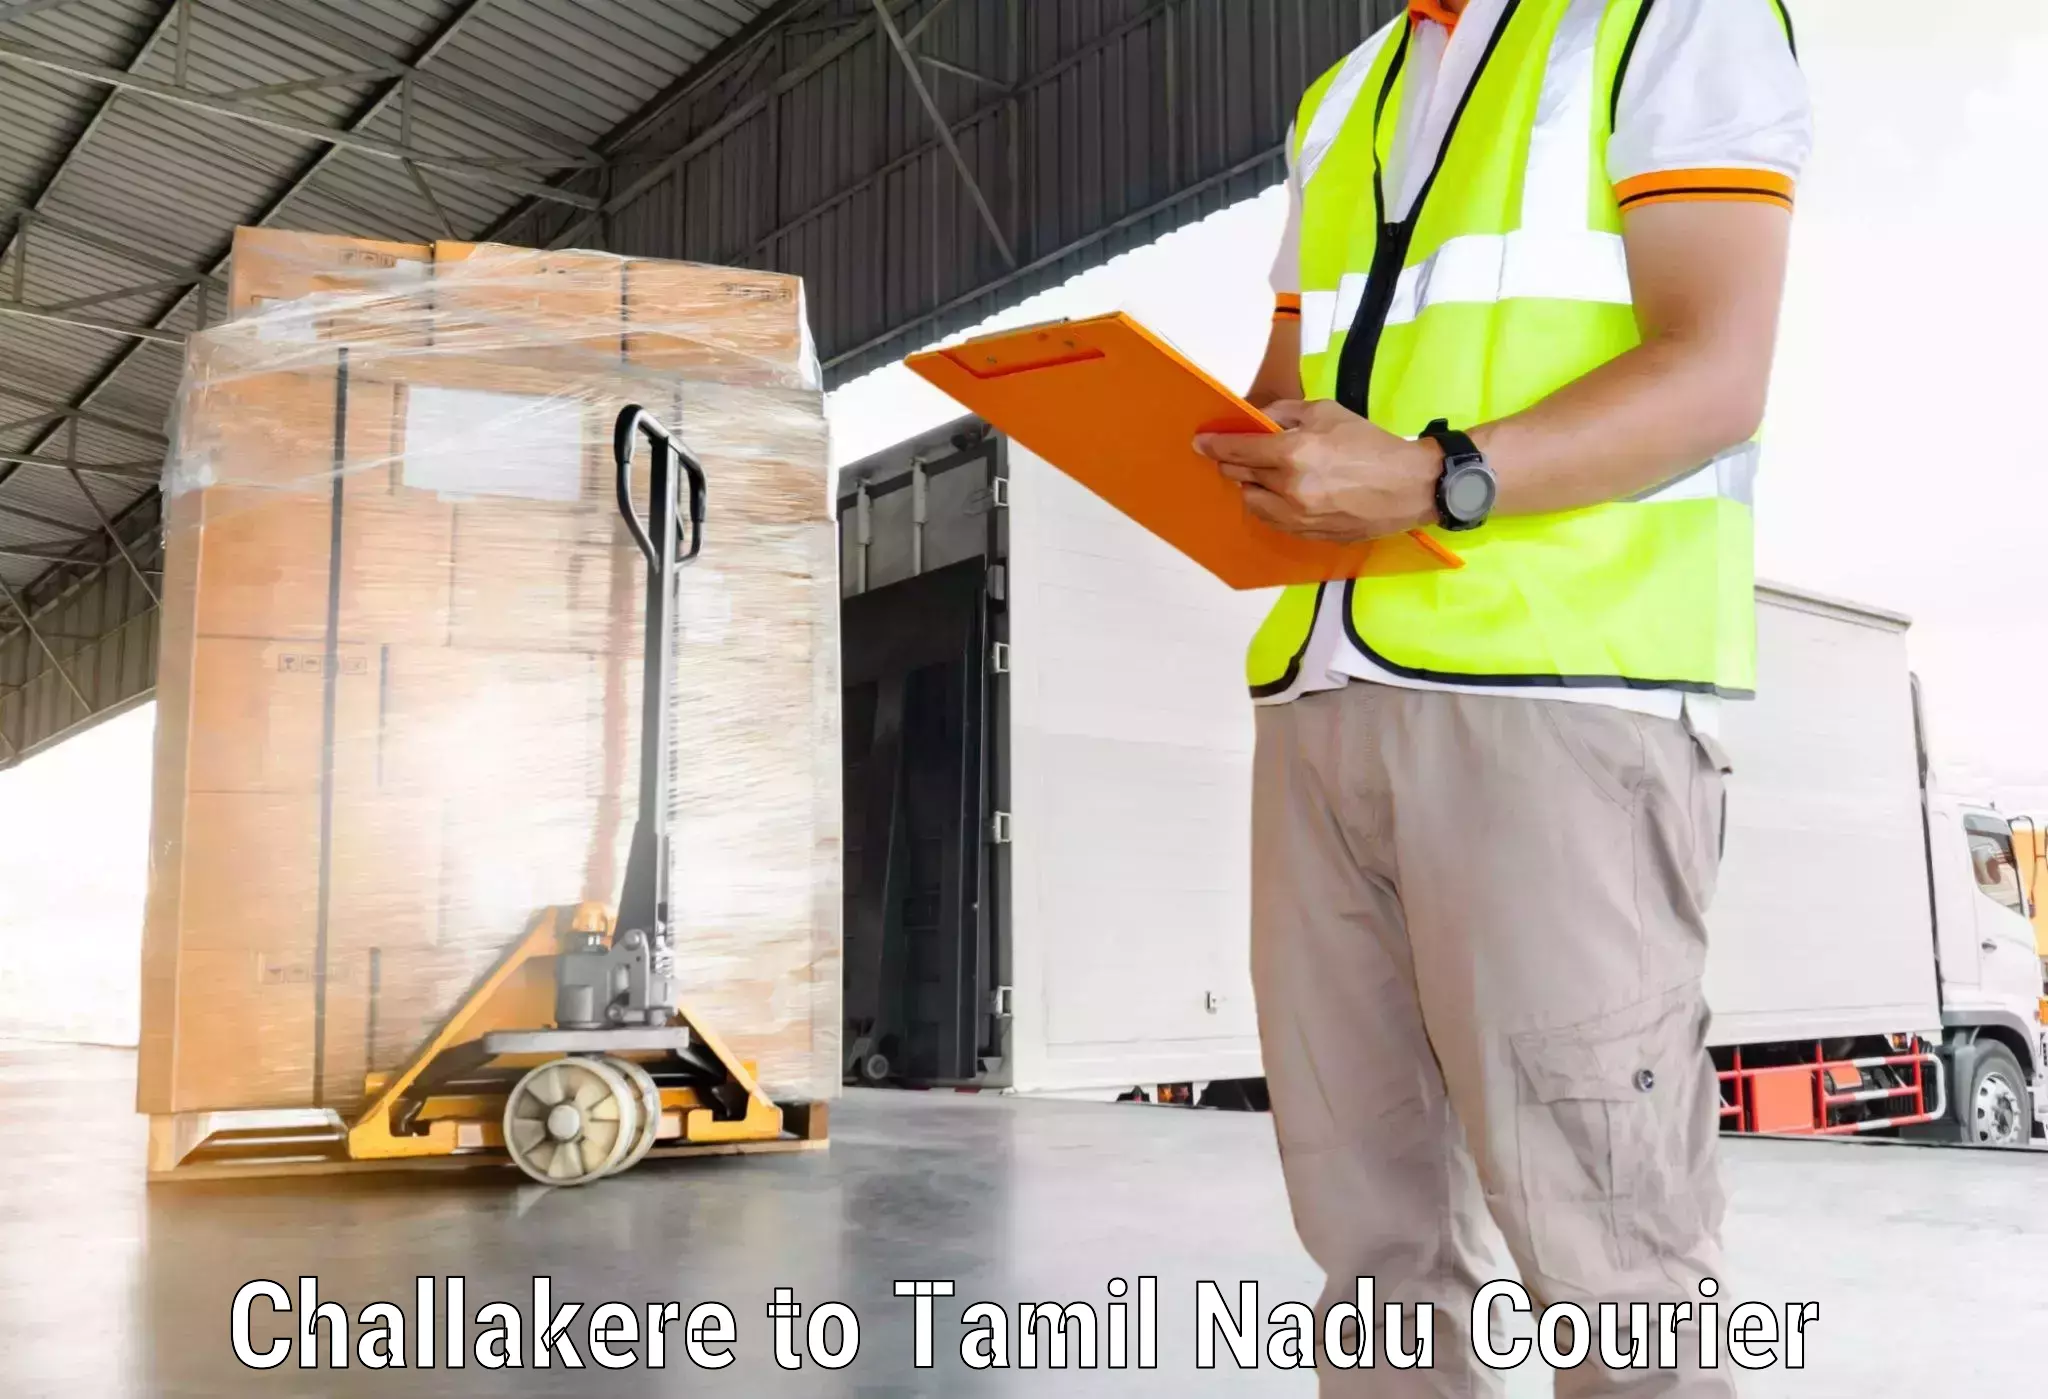 Global shipping networks Challakere to Cheyyar